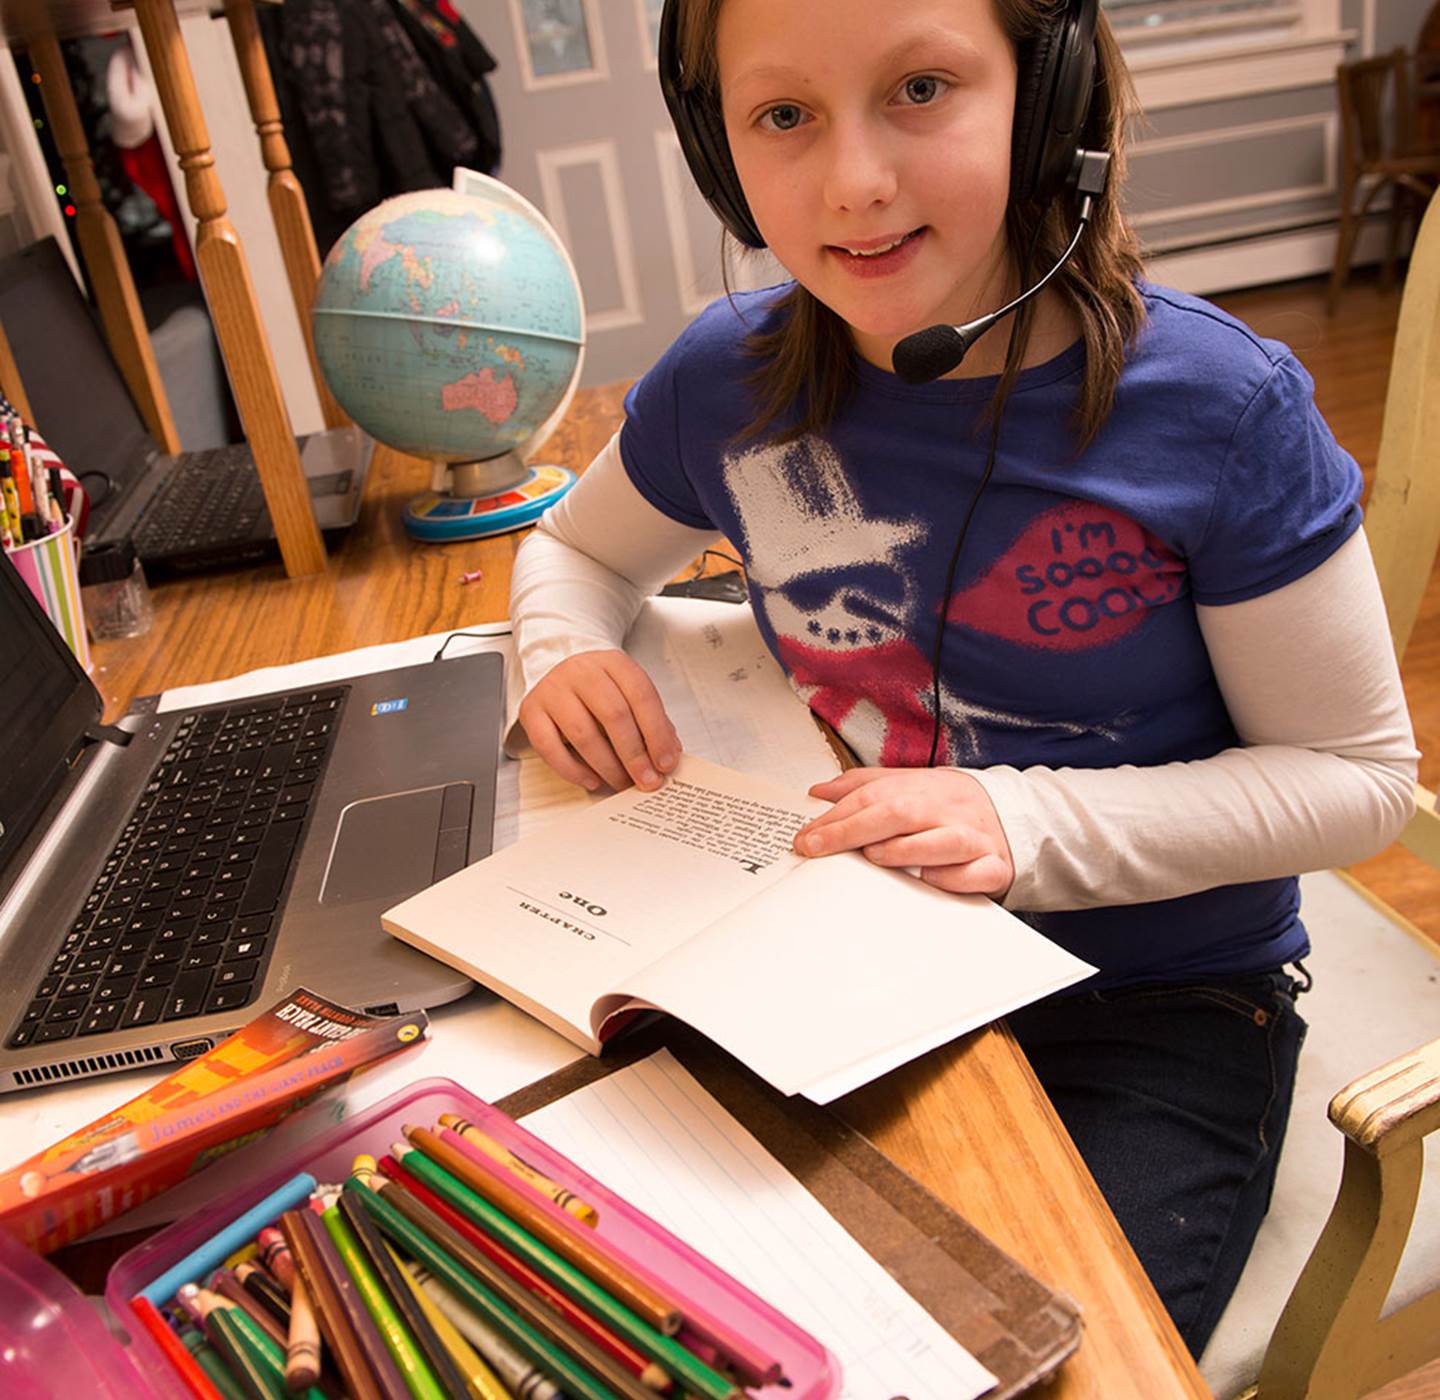 A student reading a book with a headset on.